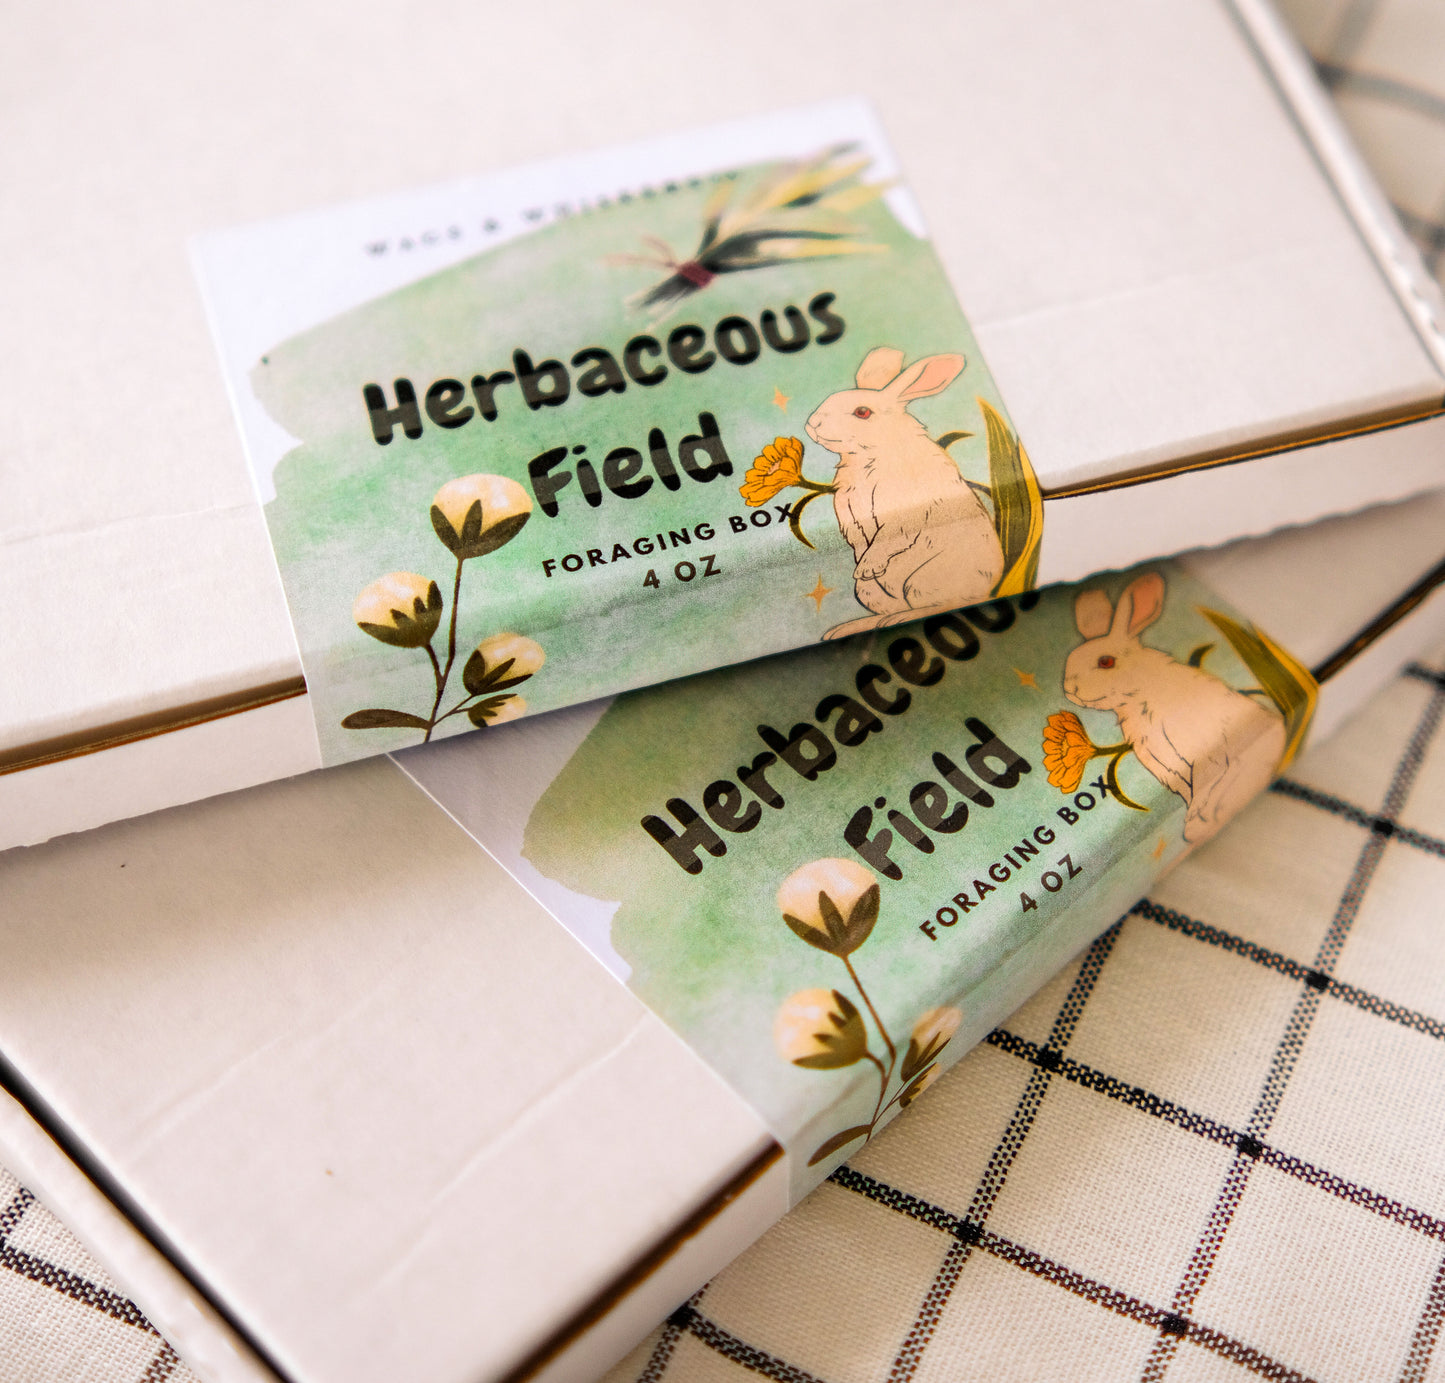 Herbaceous Fields | Foraging Box